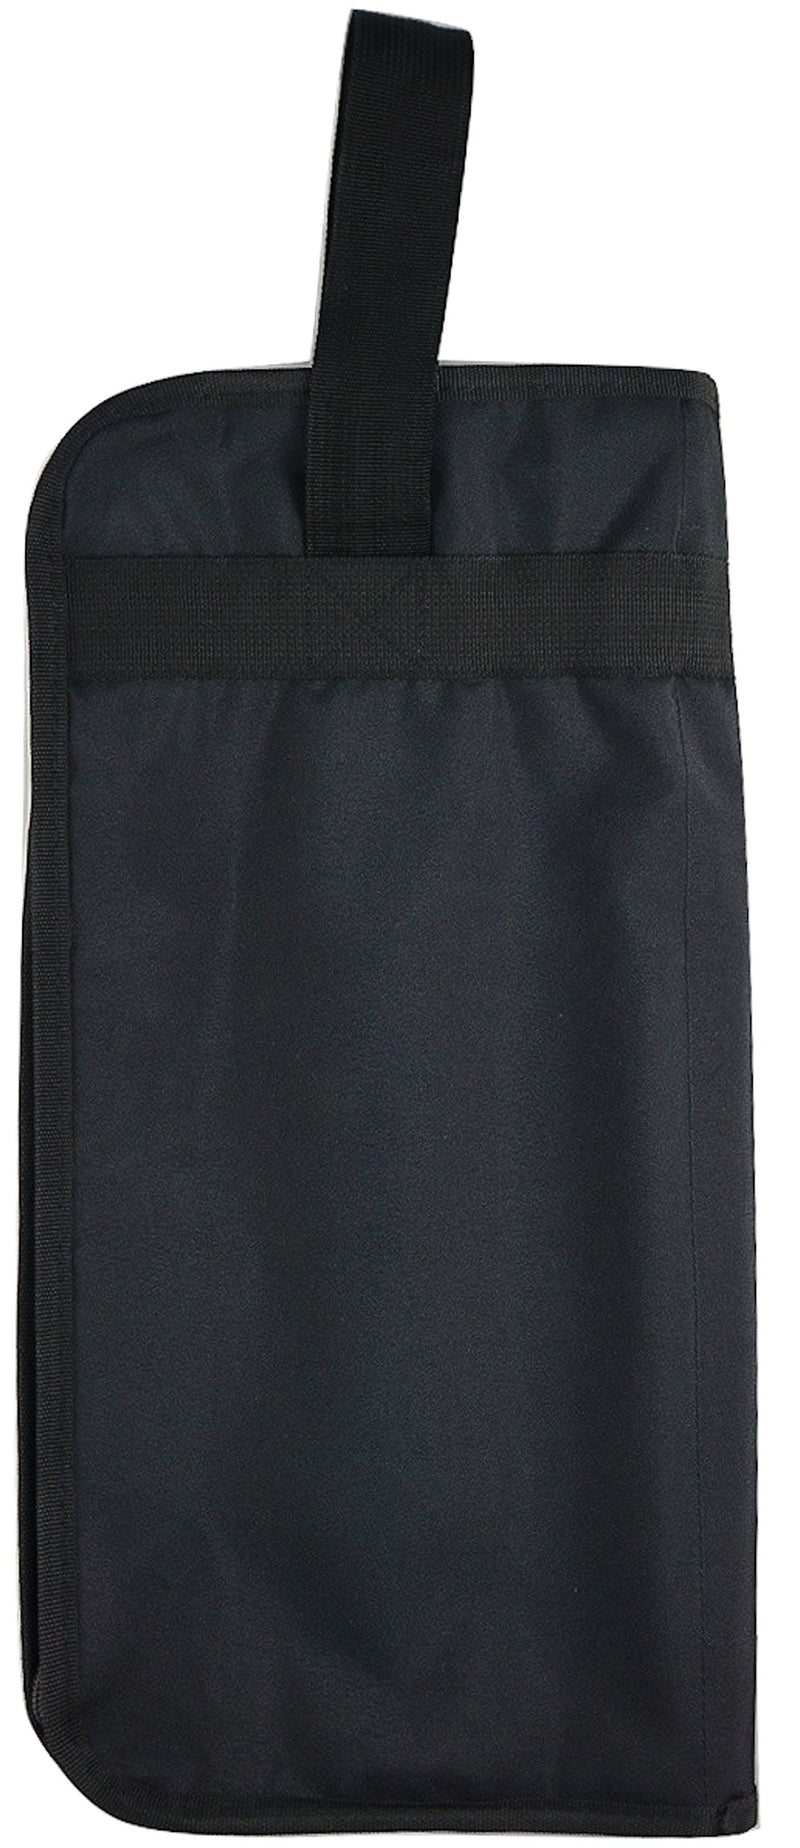 The All Purpose Drumstick Bag with Handle and Front Pocket